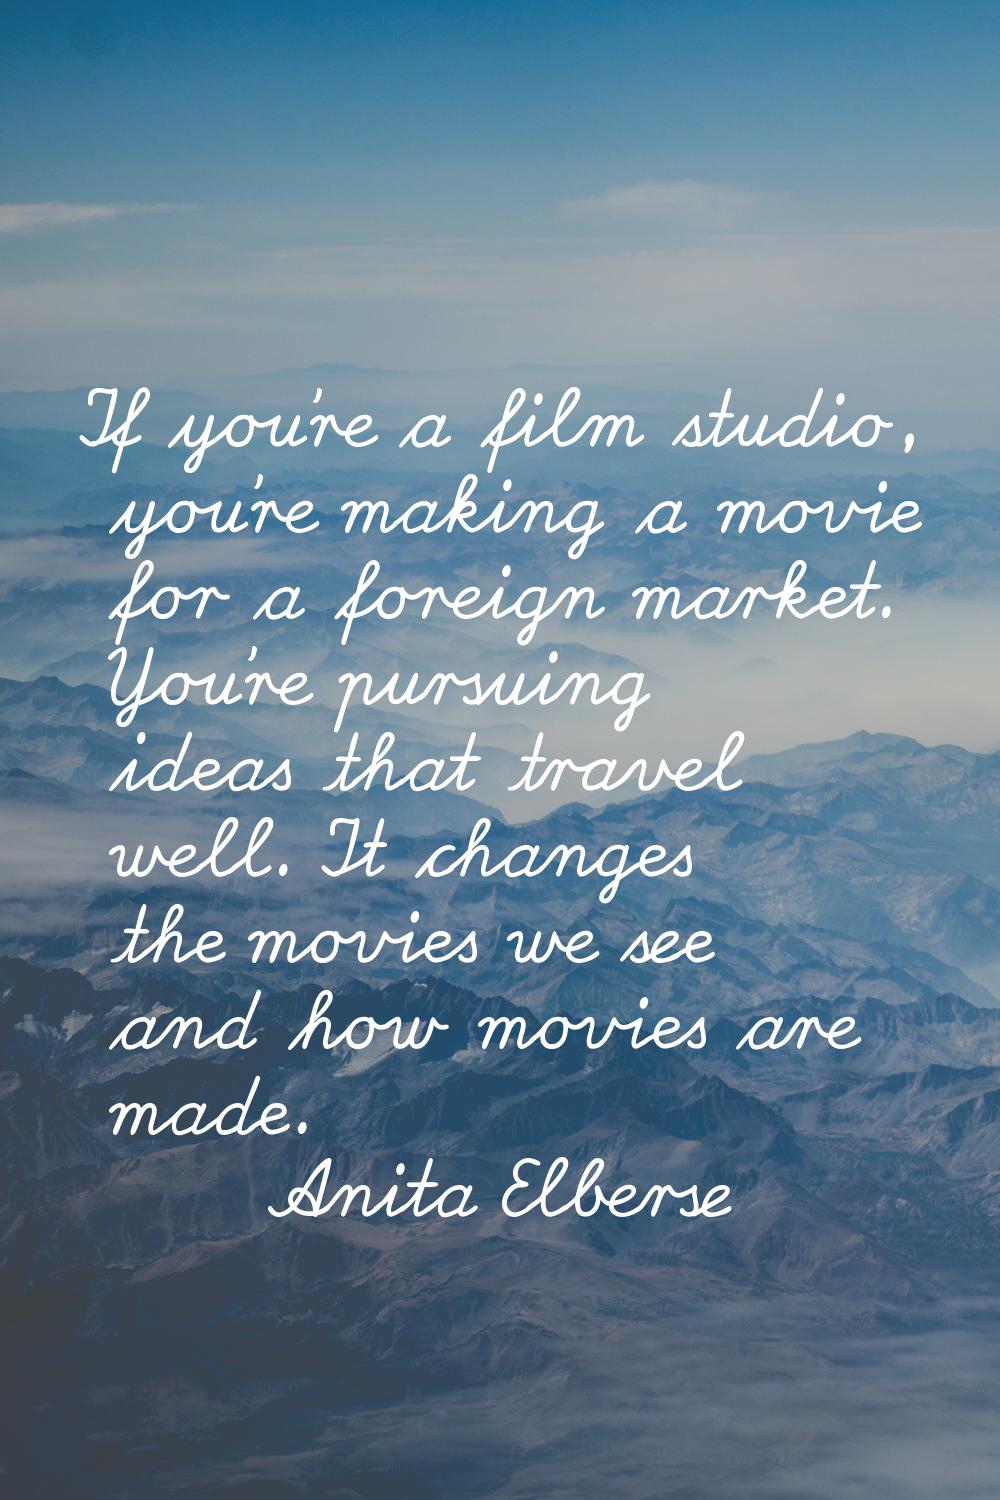 If you're a film studio, you're making a movie for a foreign market. You're pursuing ideas that tra